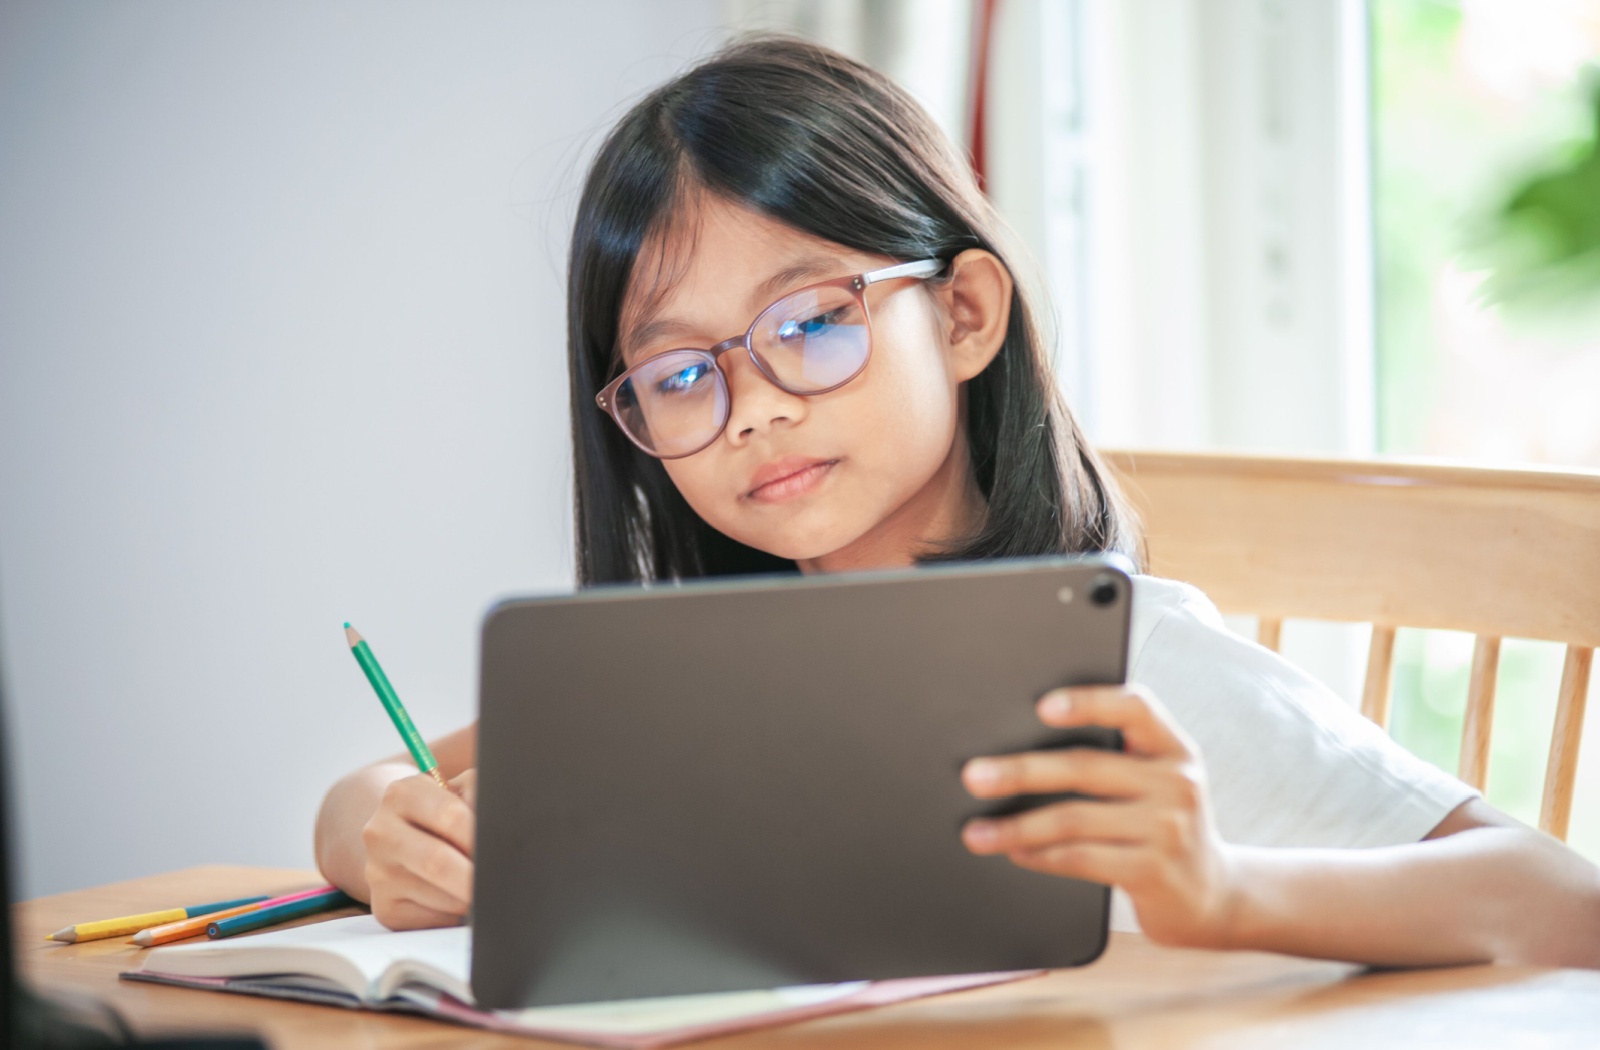 A small girl wearing glasses and looking into her ipad at a close distance